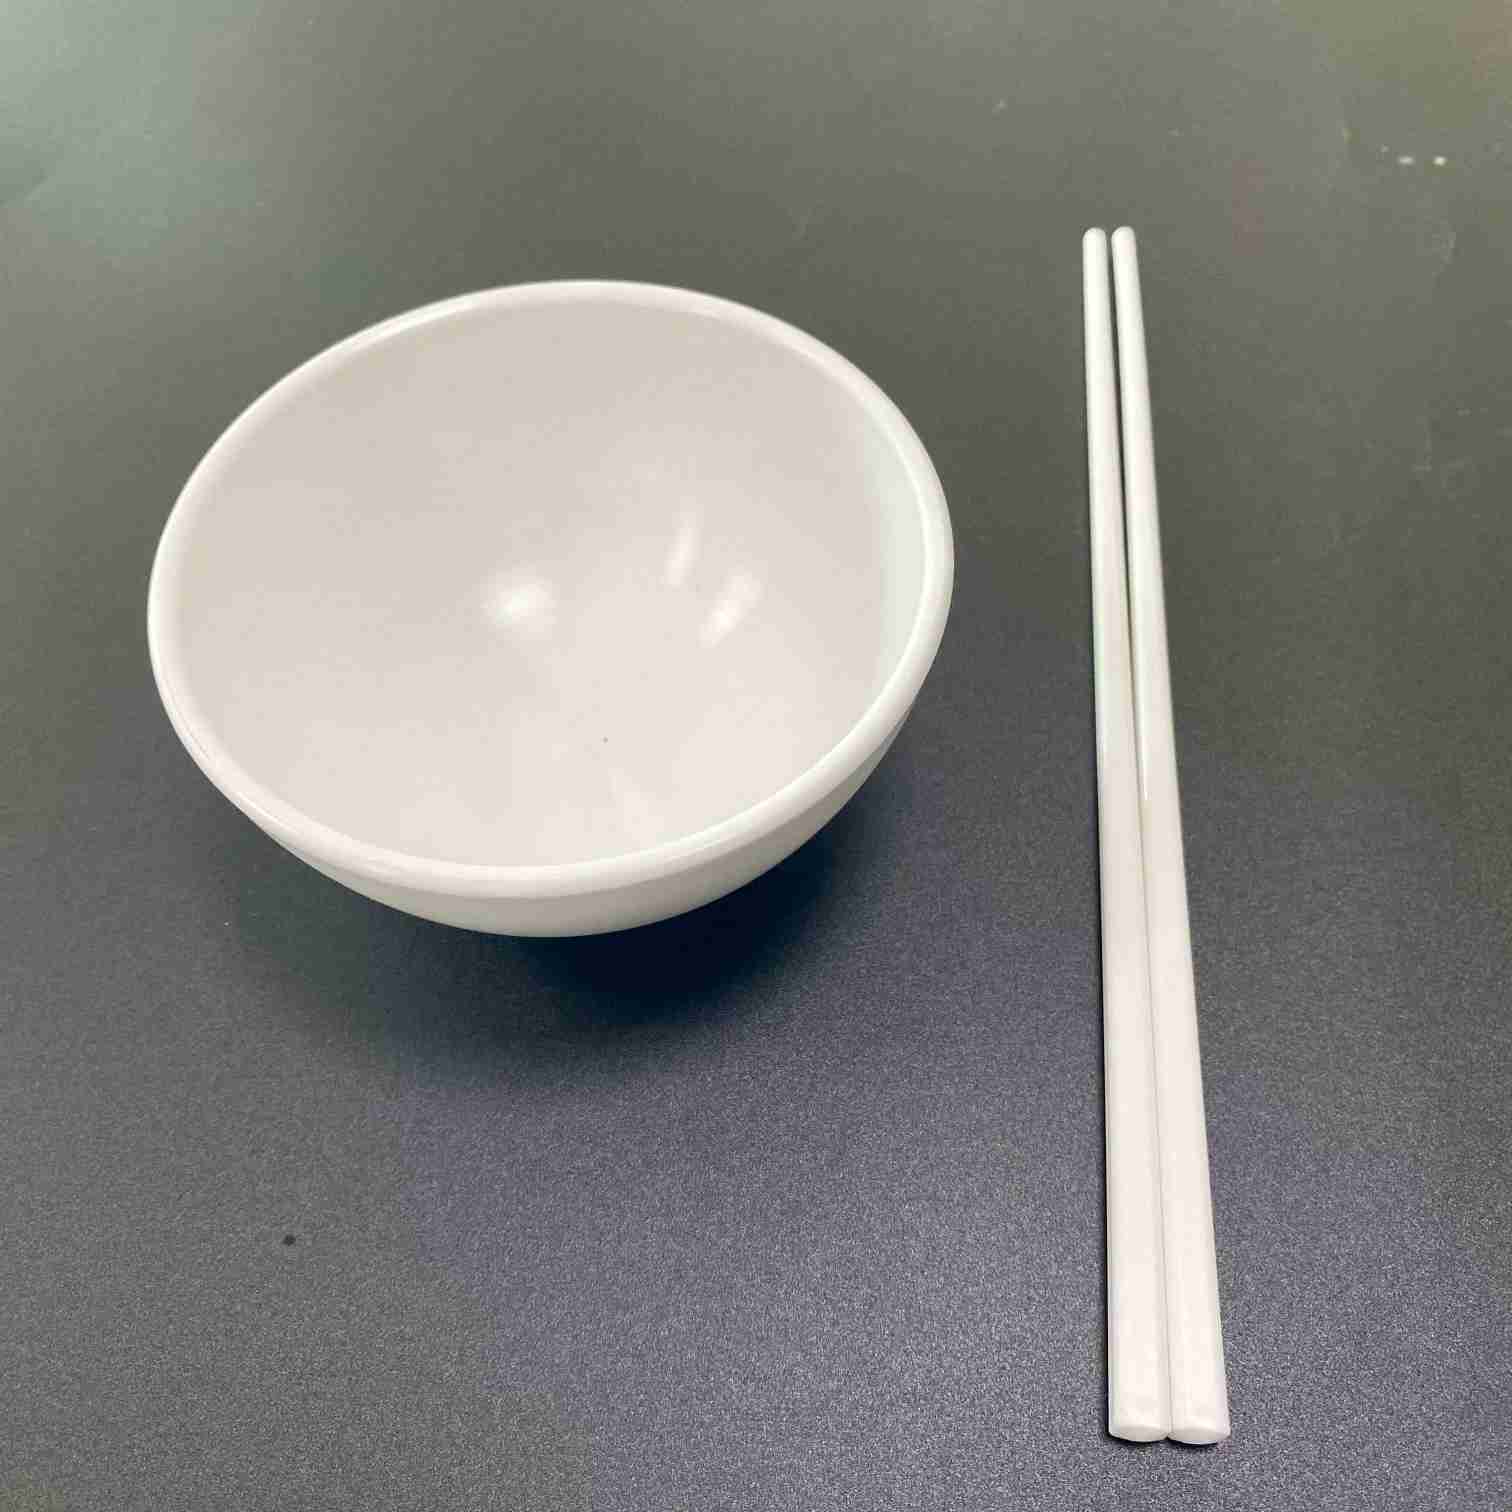 How dirty the chopsticks we use every day can induce various digestive tract diseases